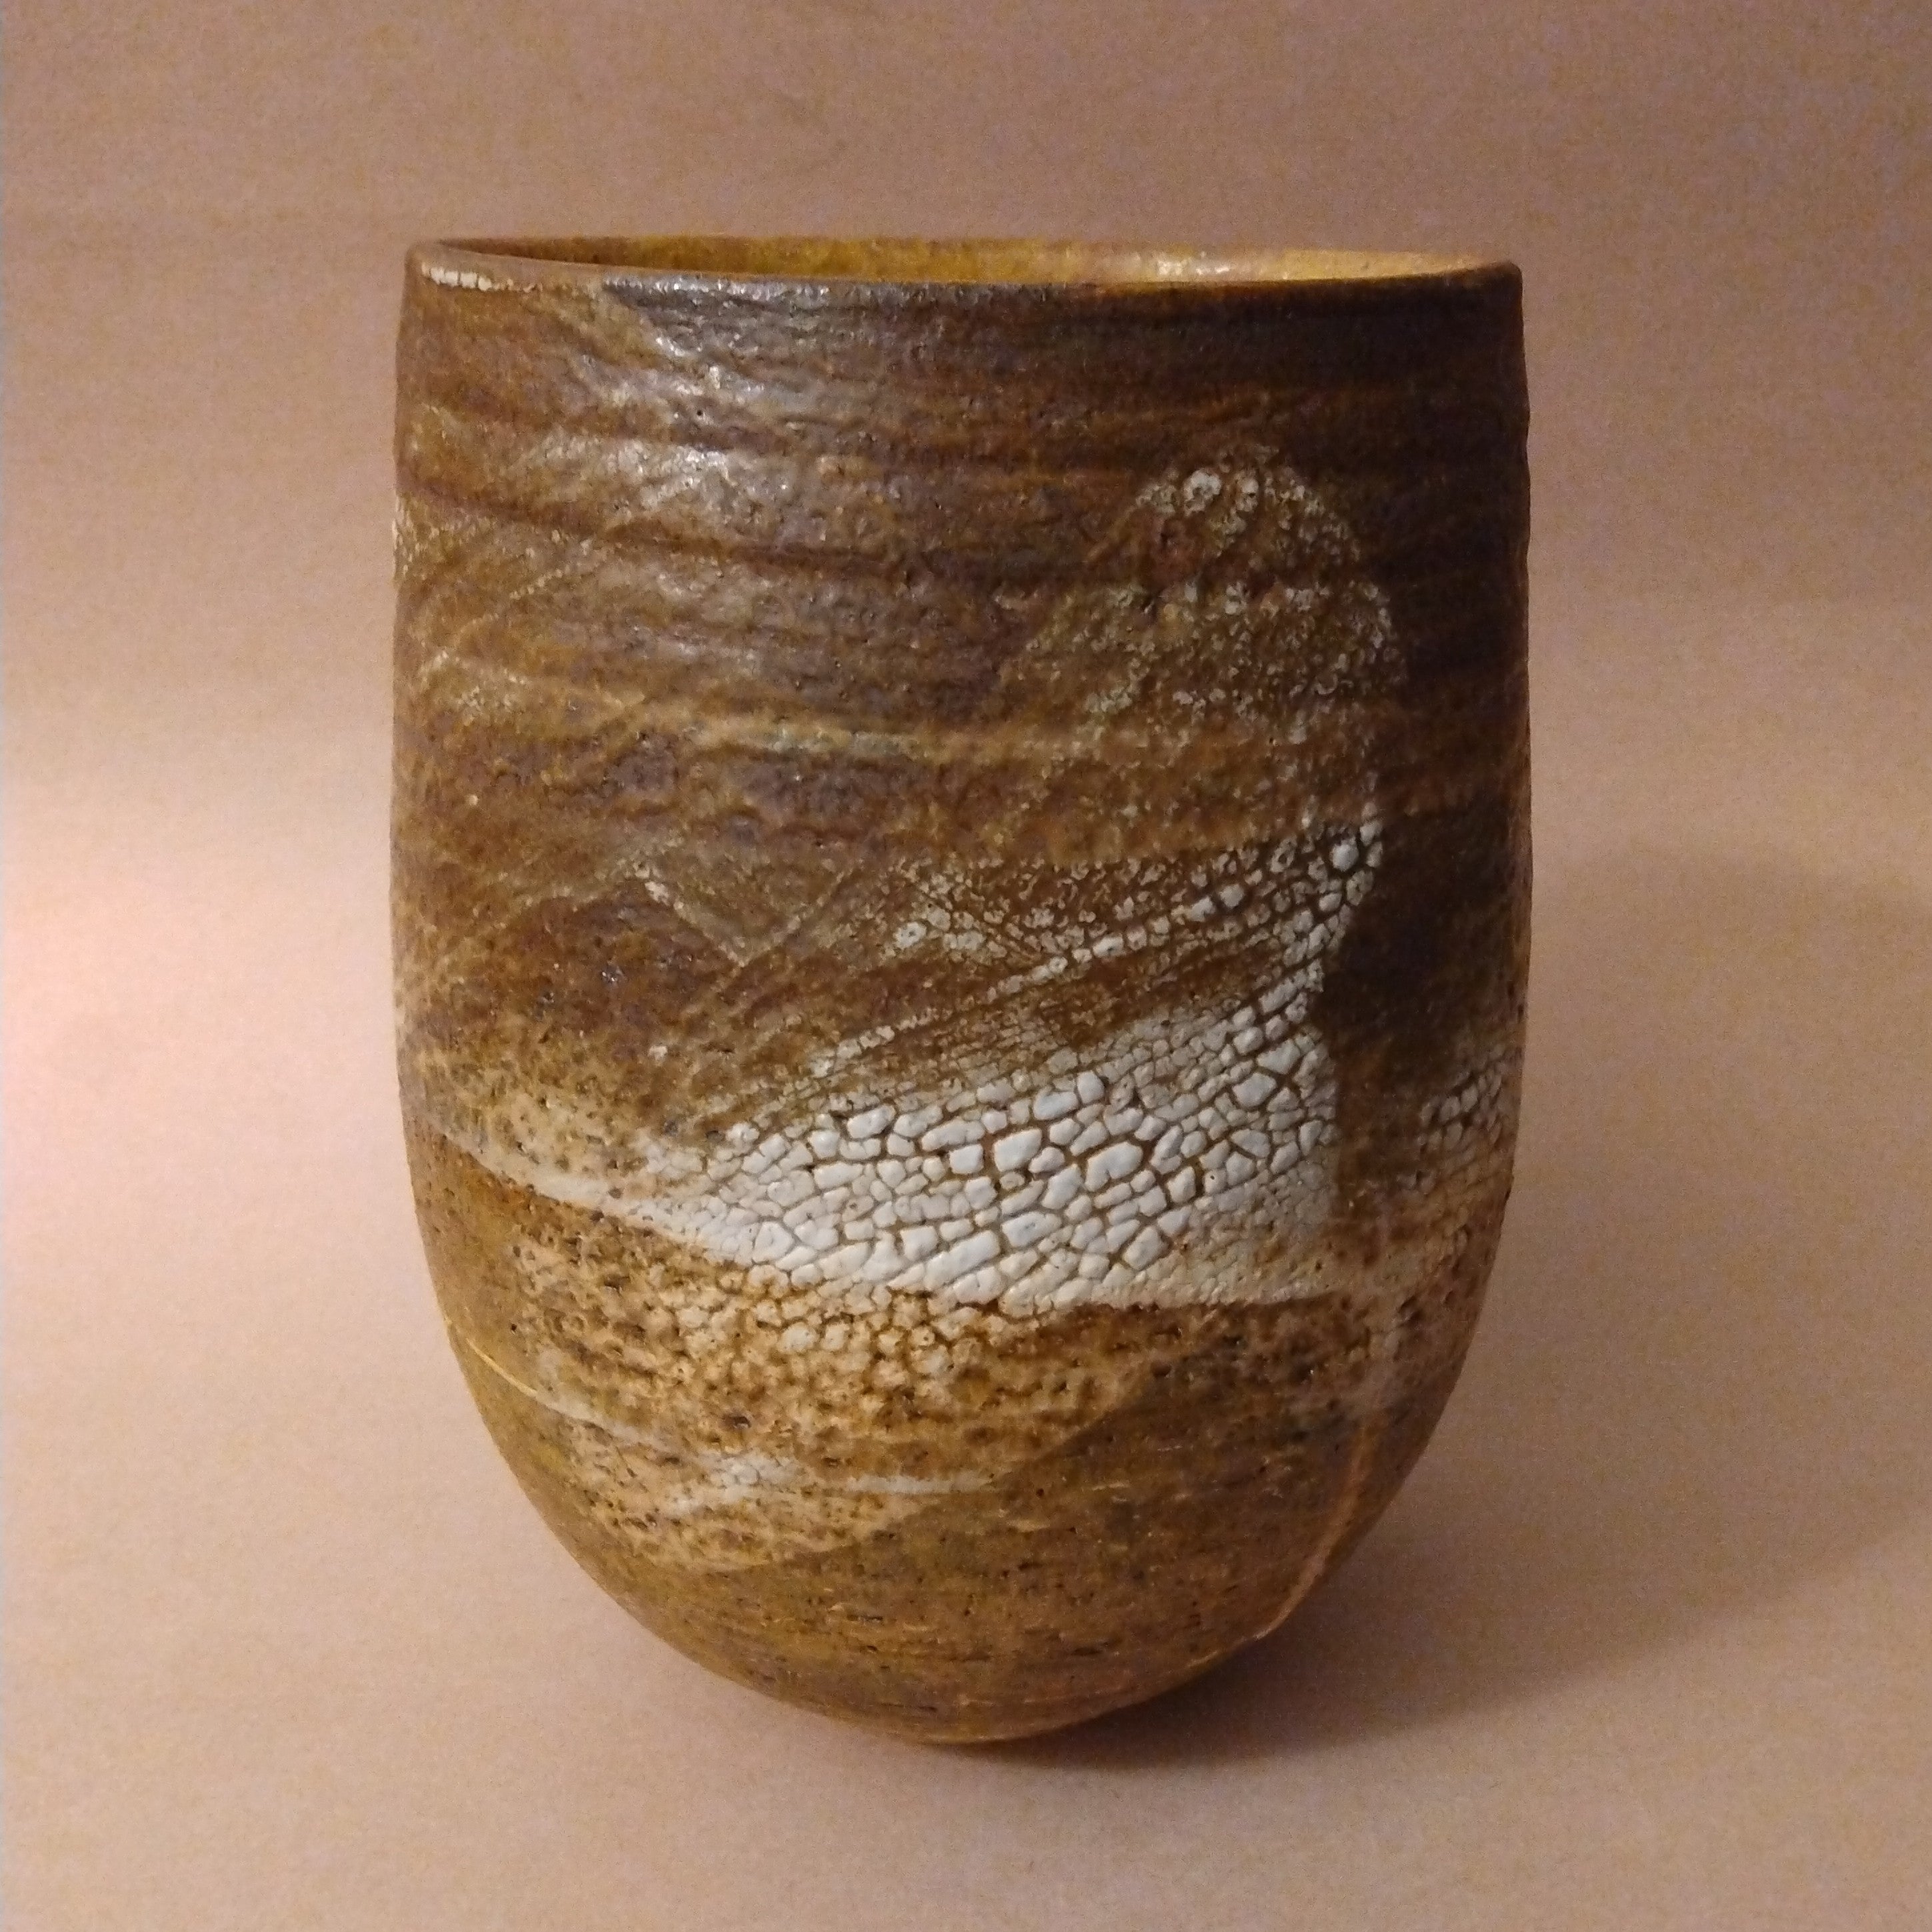 Vase, by Brian O'Neill